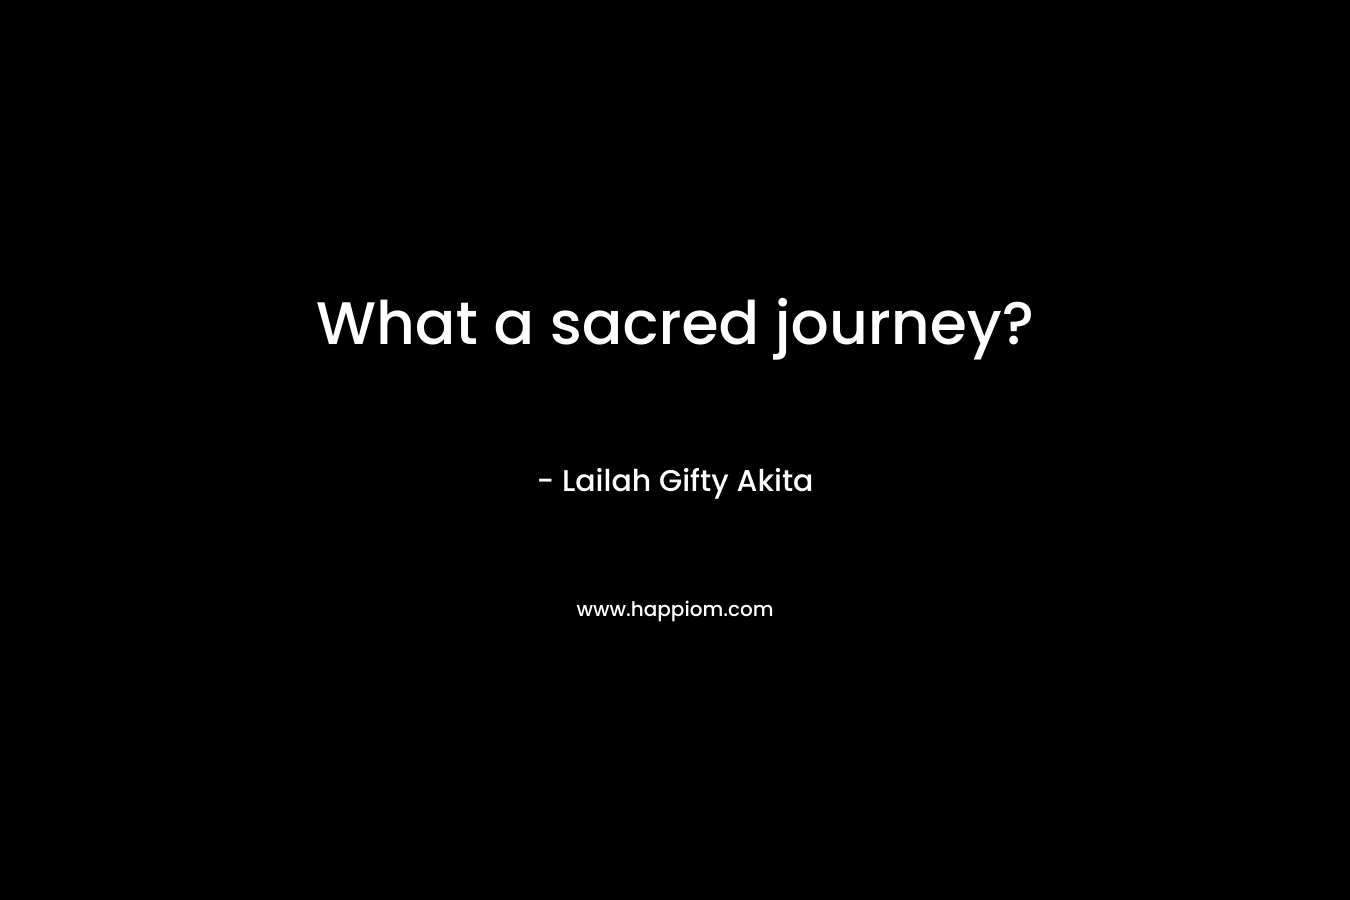 What a sacred journey?